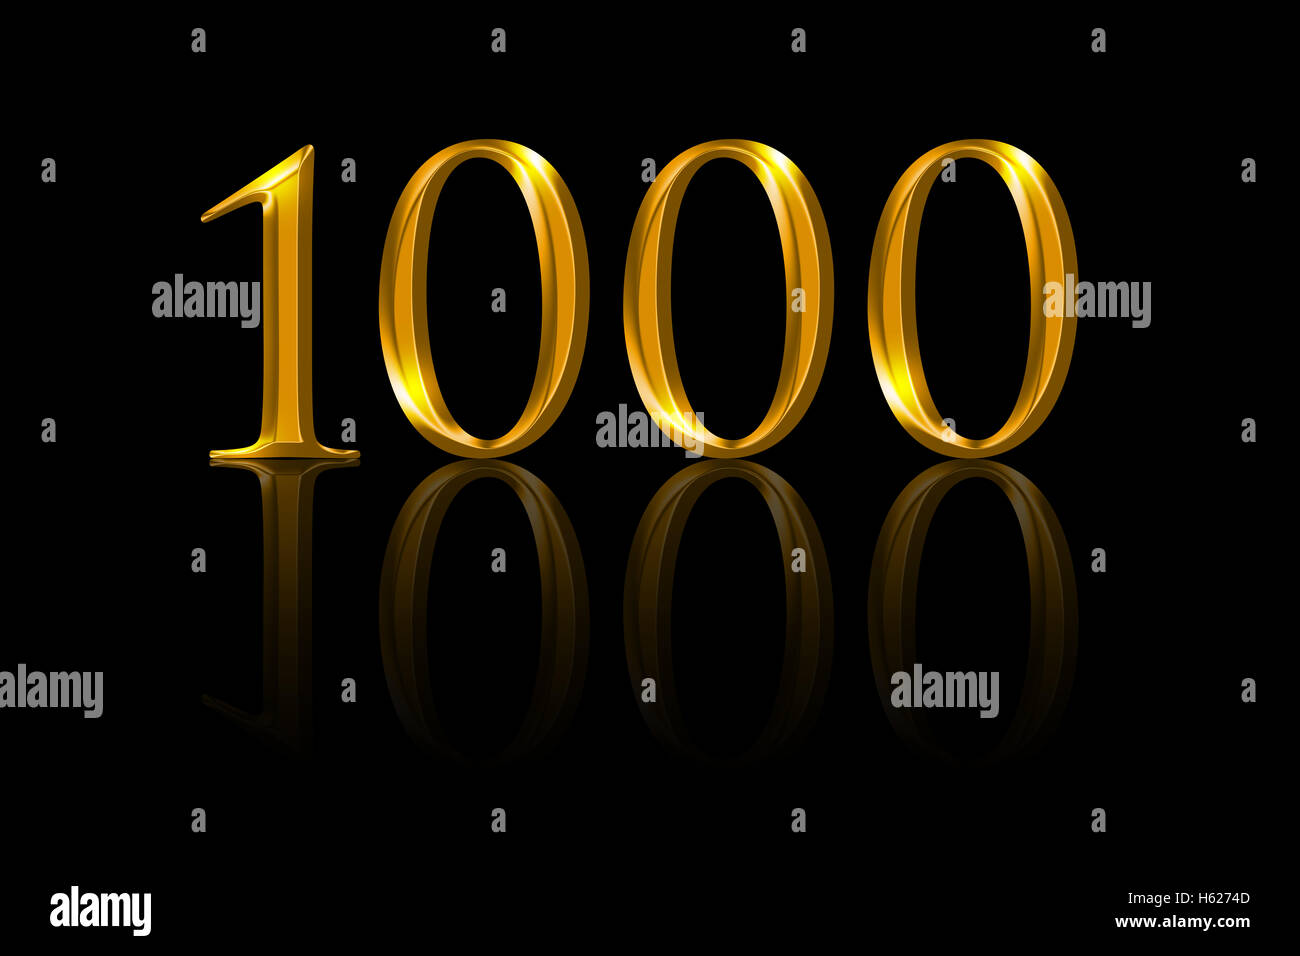 One thousand gold numbers on black background. A thousandth anniversary or attained value expressed. Stock Photo